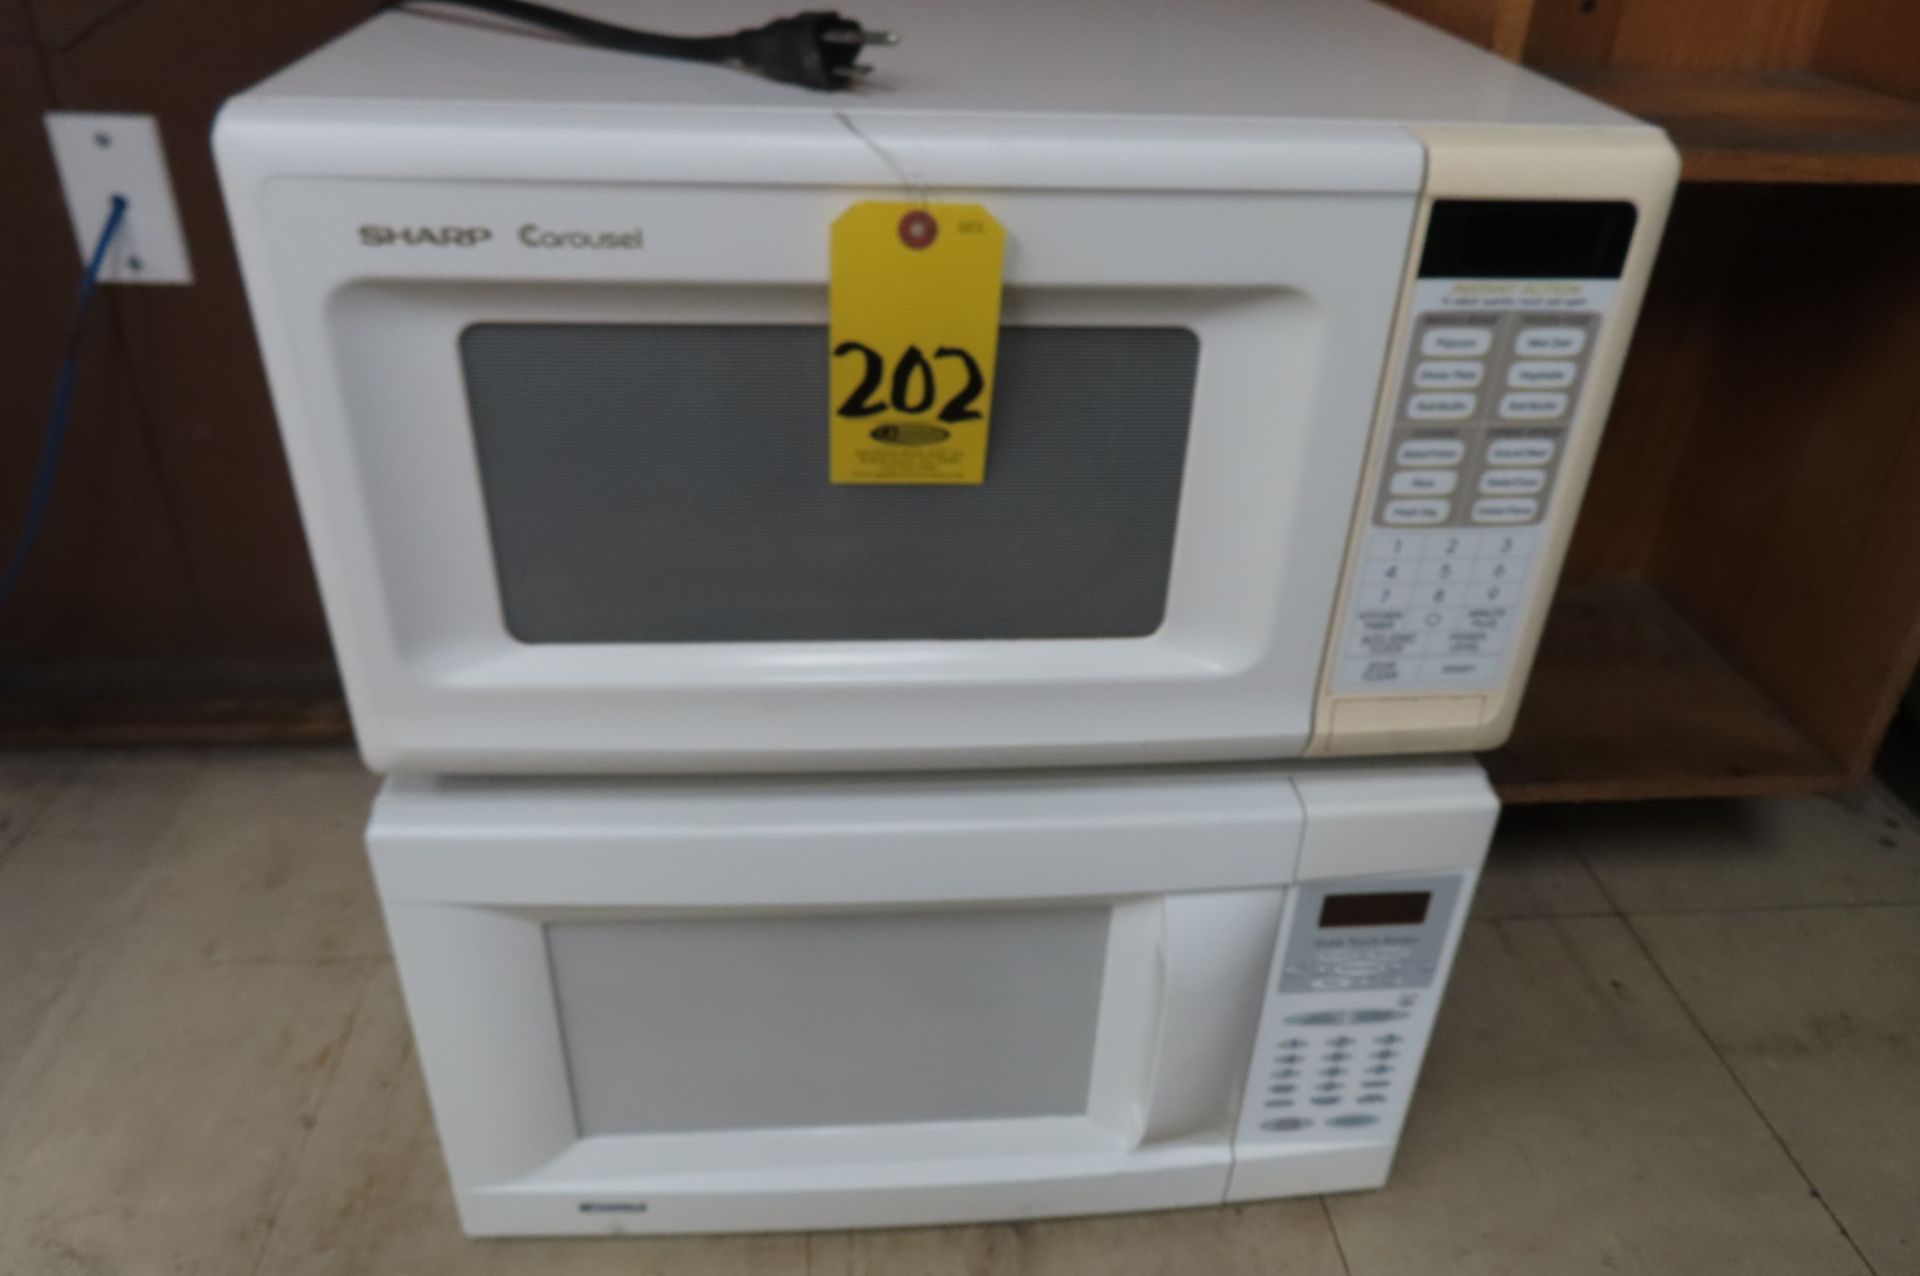 KENMORE AND SHARP MICROWAVES